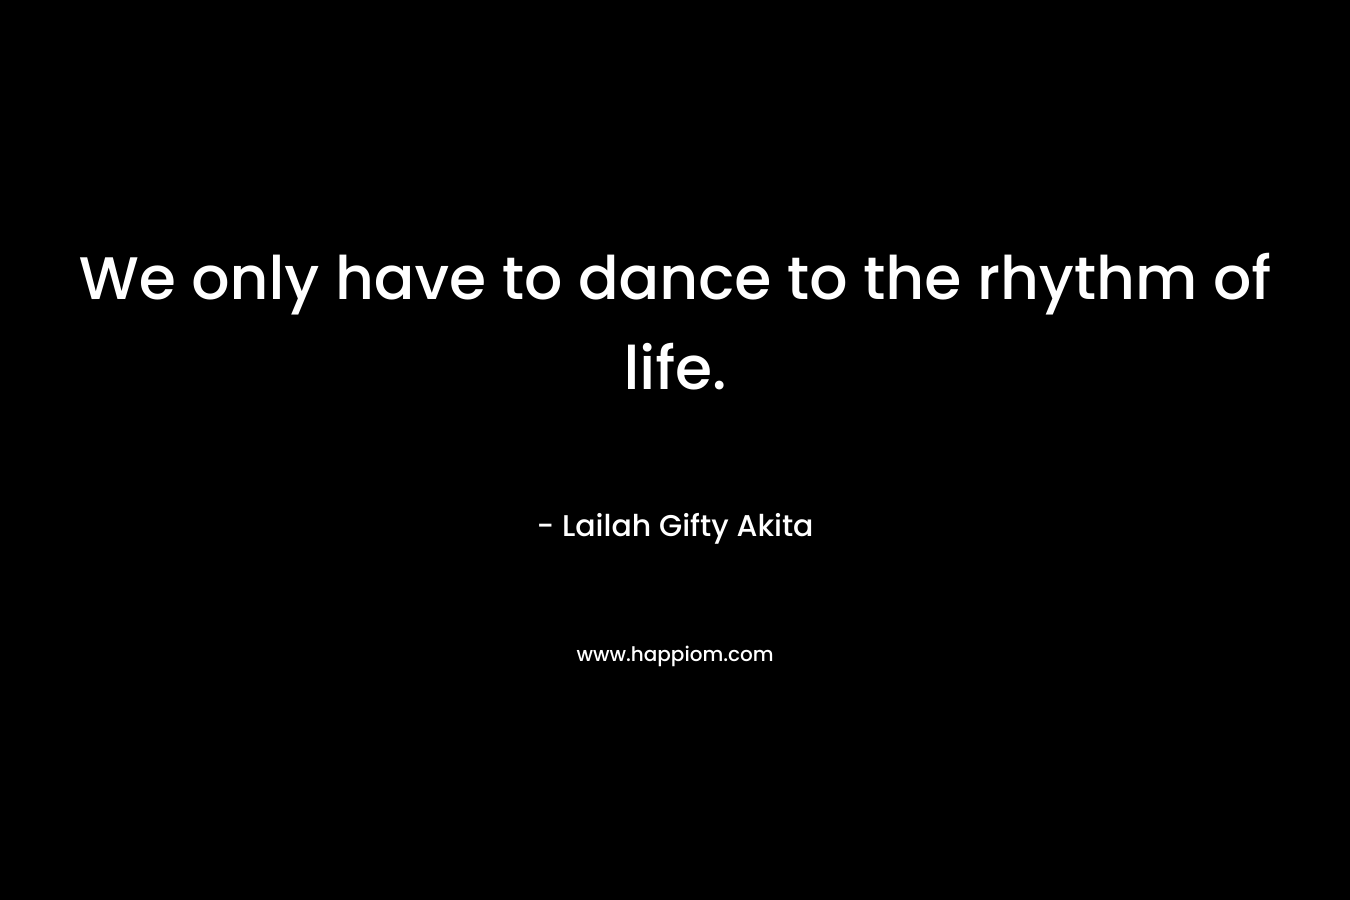 We only have to dance to the rhythm of life. – Lailah Gifty Akita